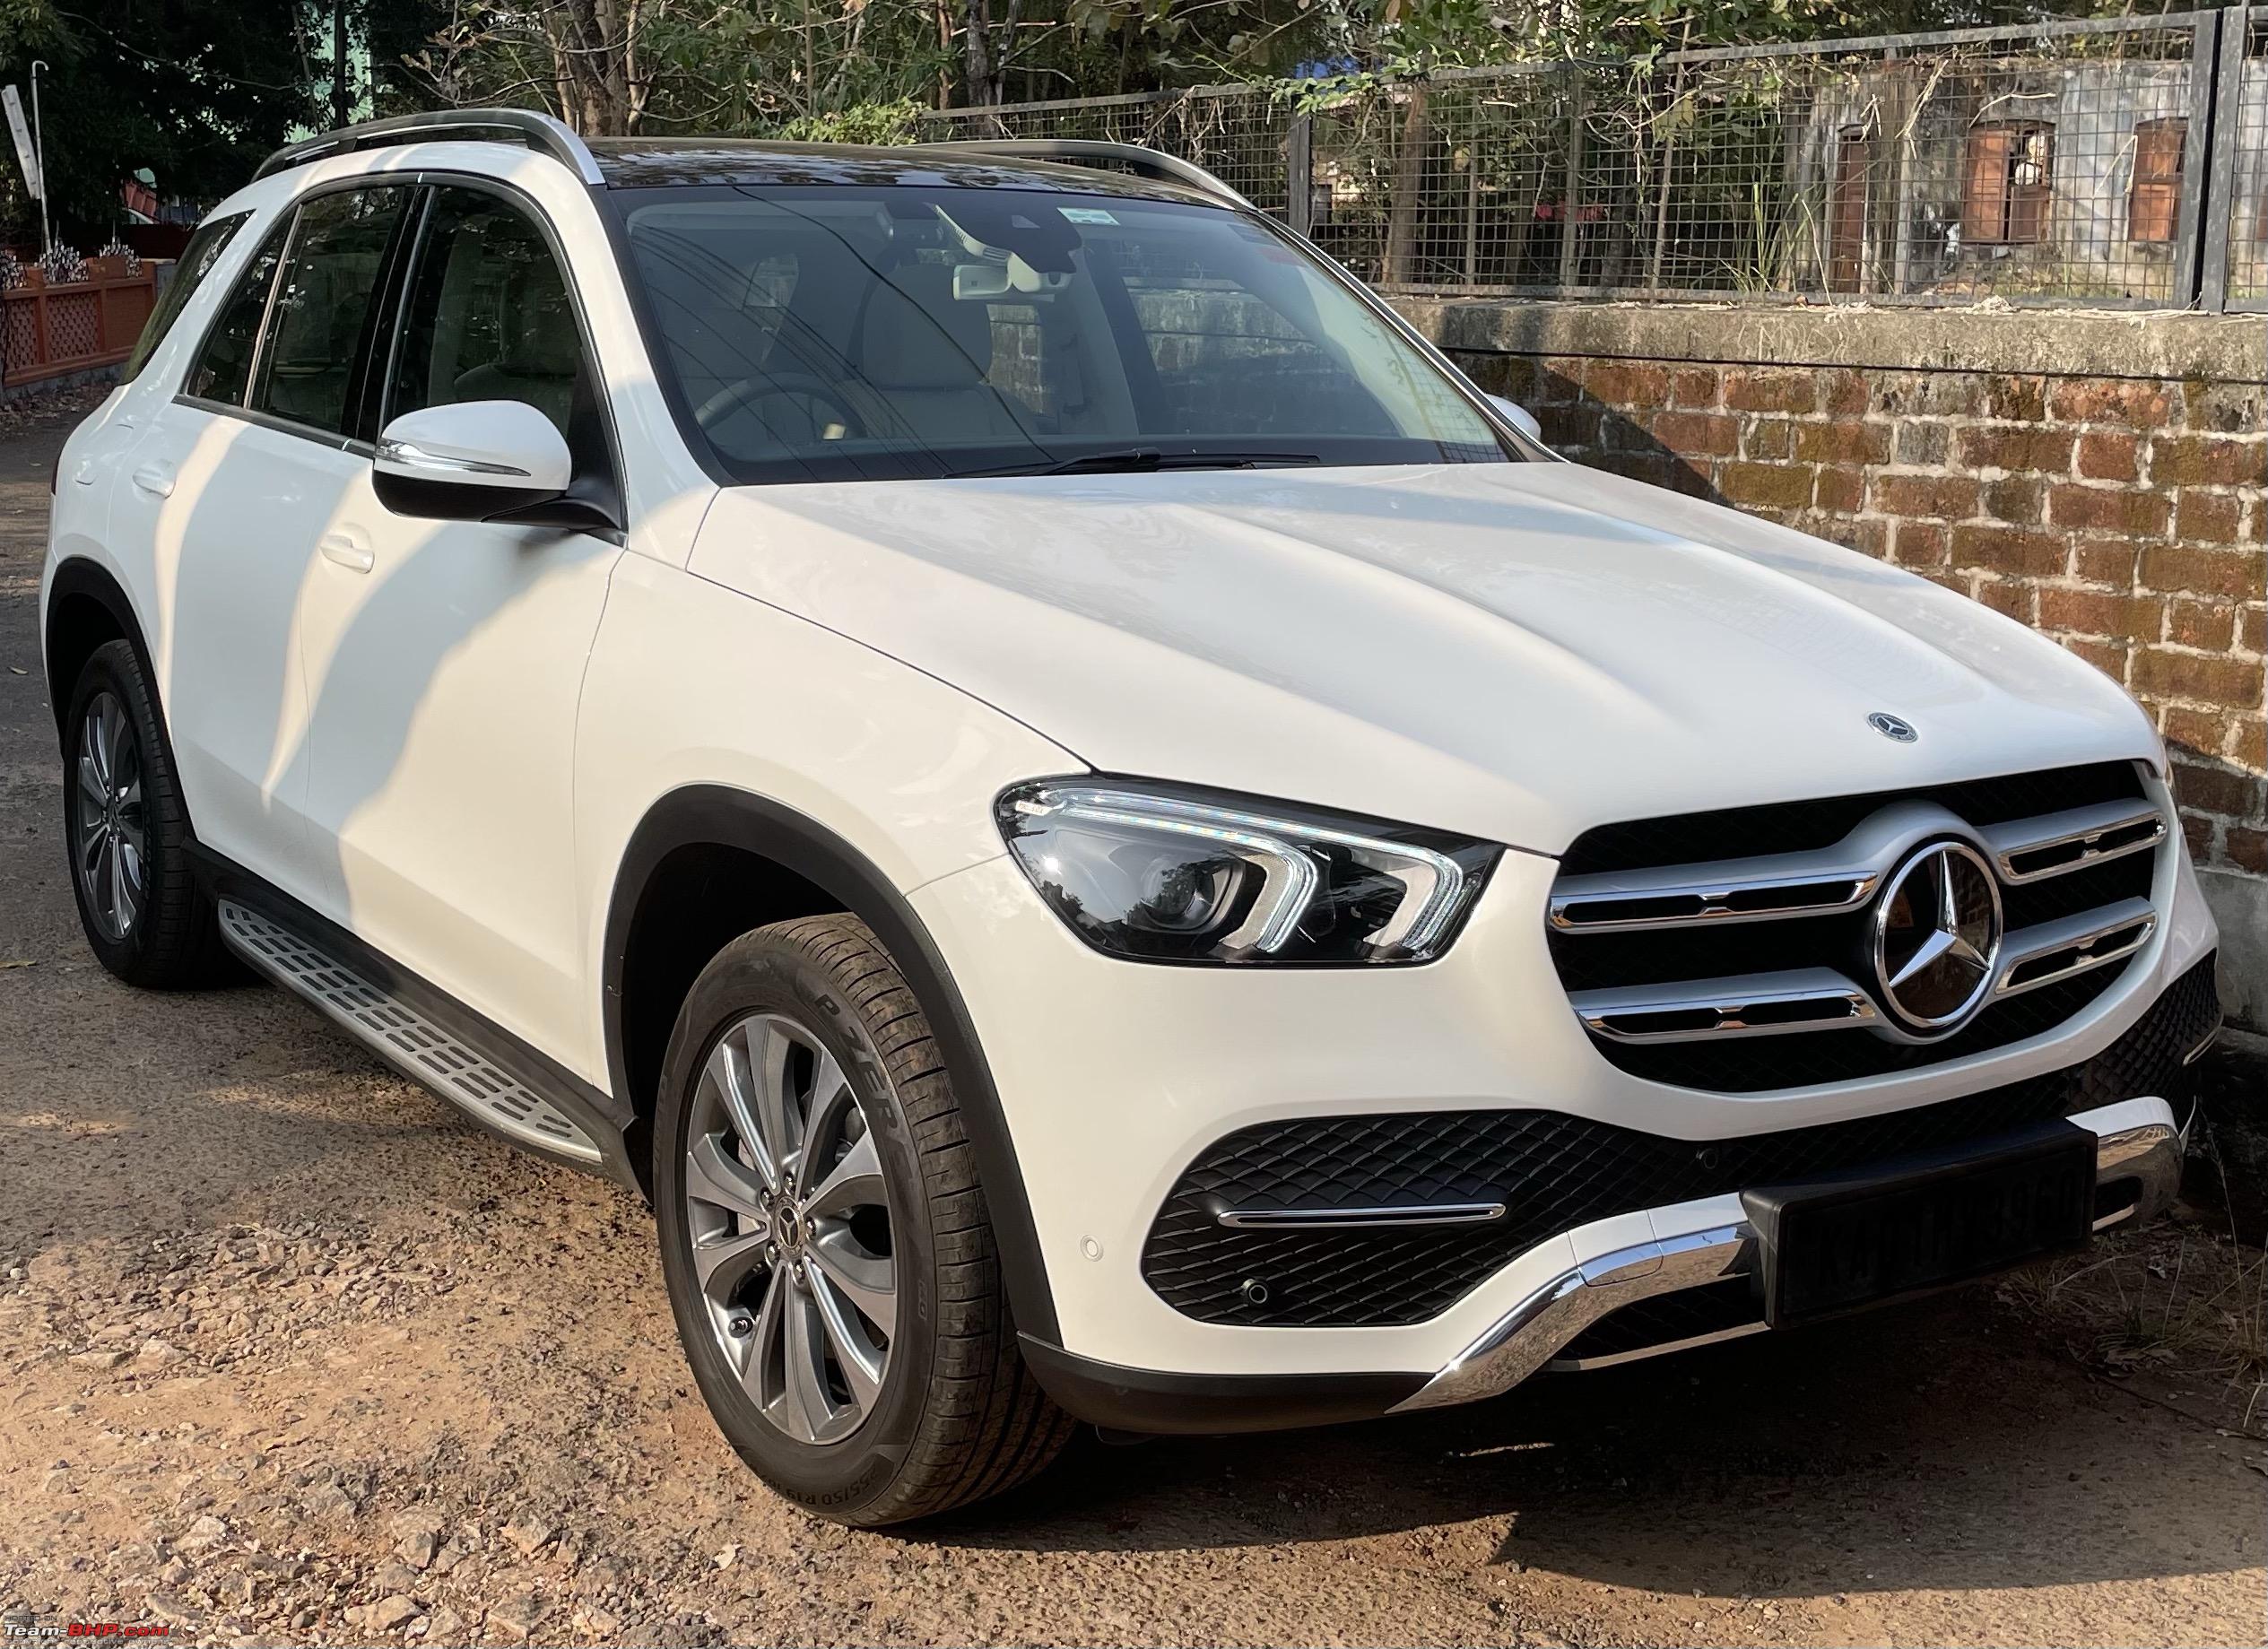 Our 3-pointed star | Mercedes Benz GLE 300d Review - Team-BHP